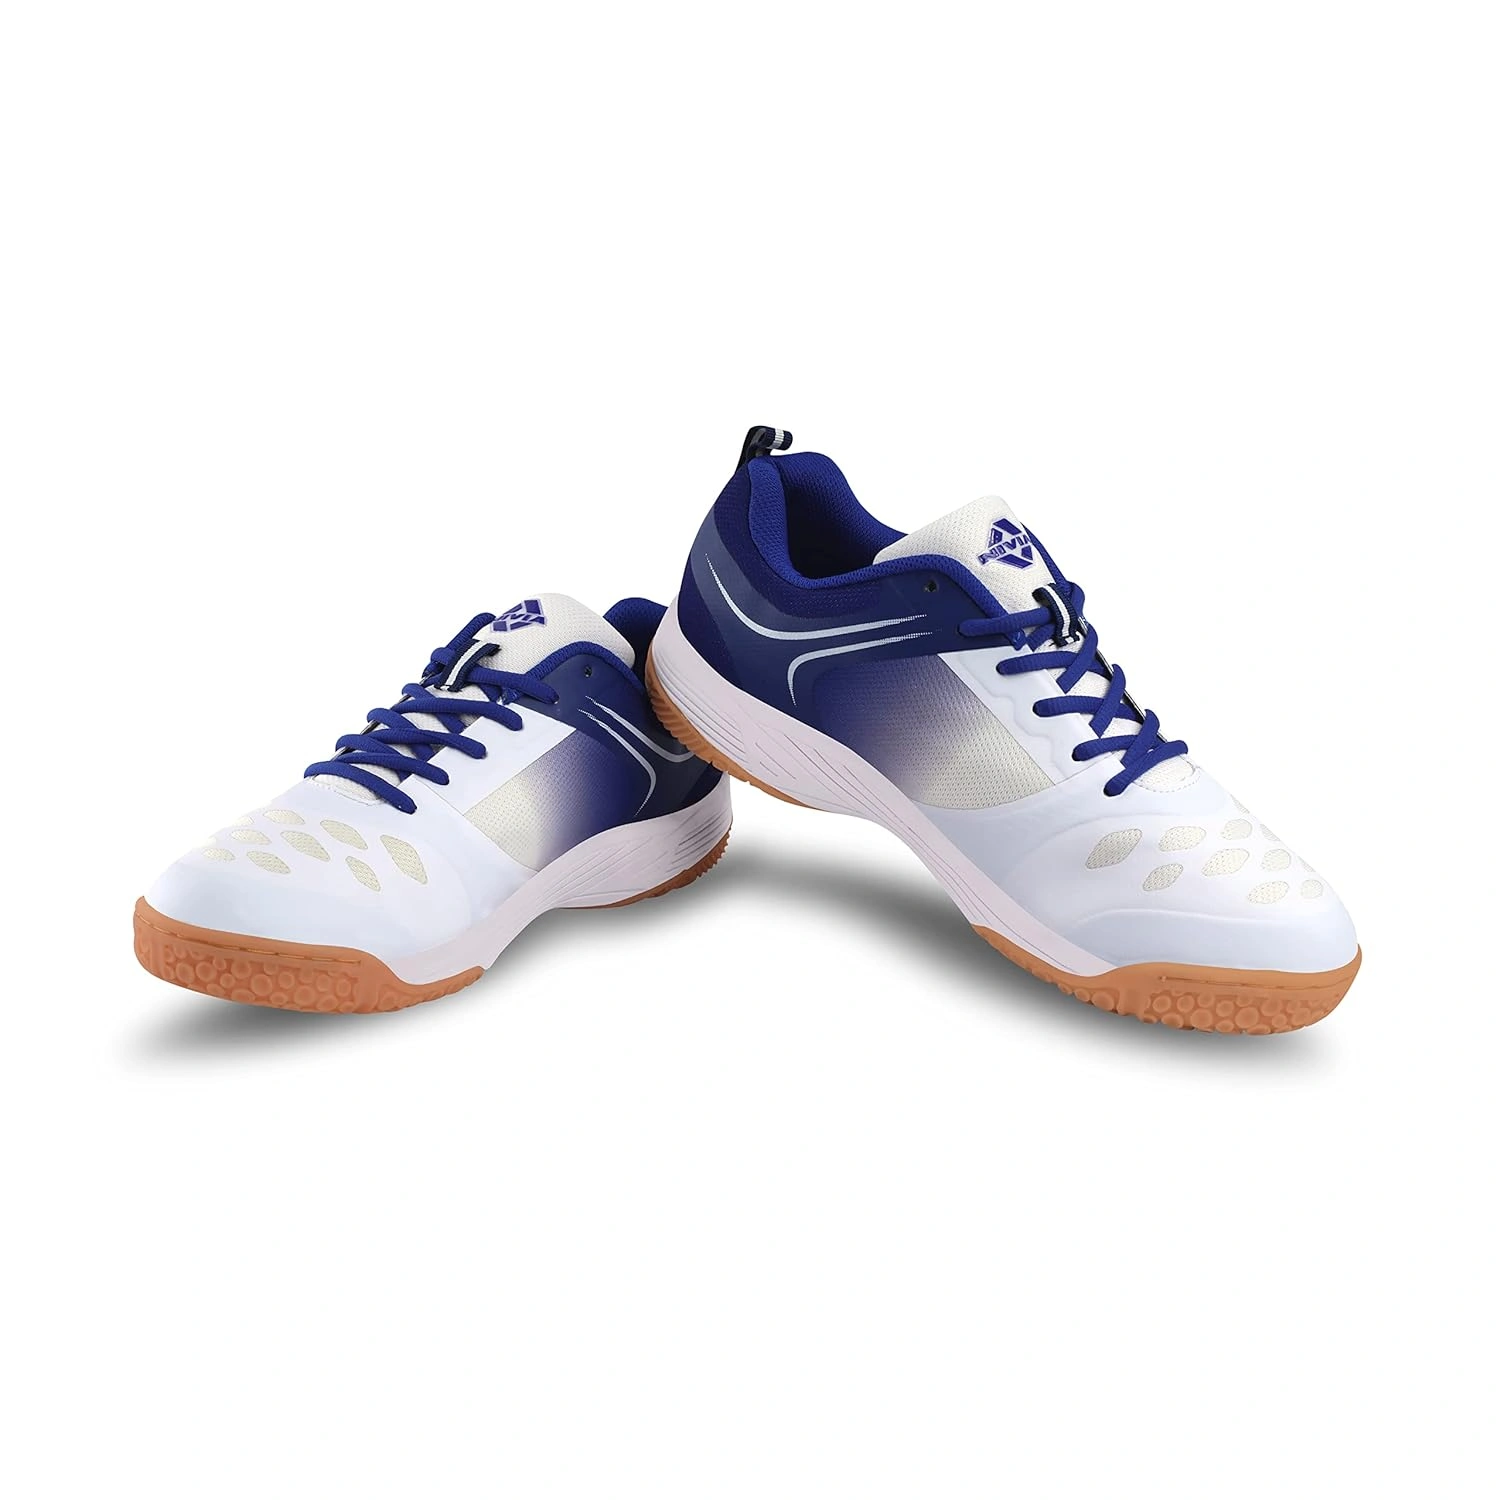 Nivia Hy-court 2.0 Badminton Shoes For Mens-WHITE-10-5